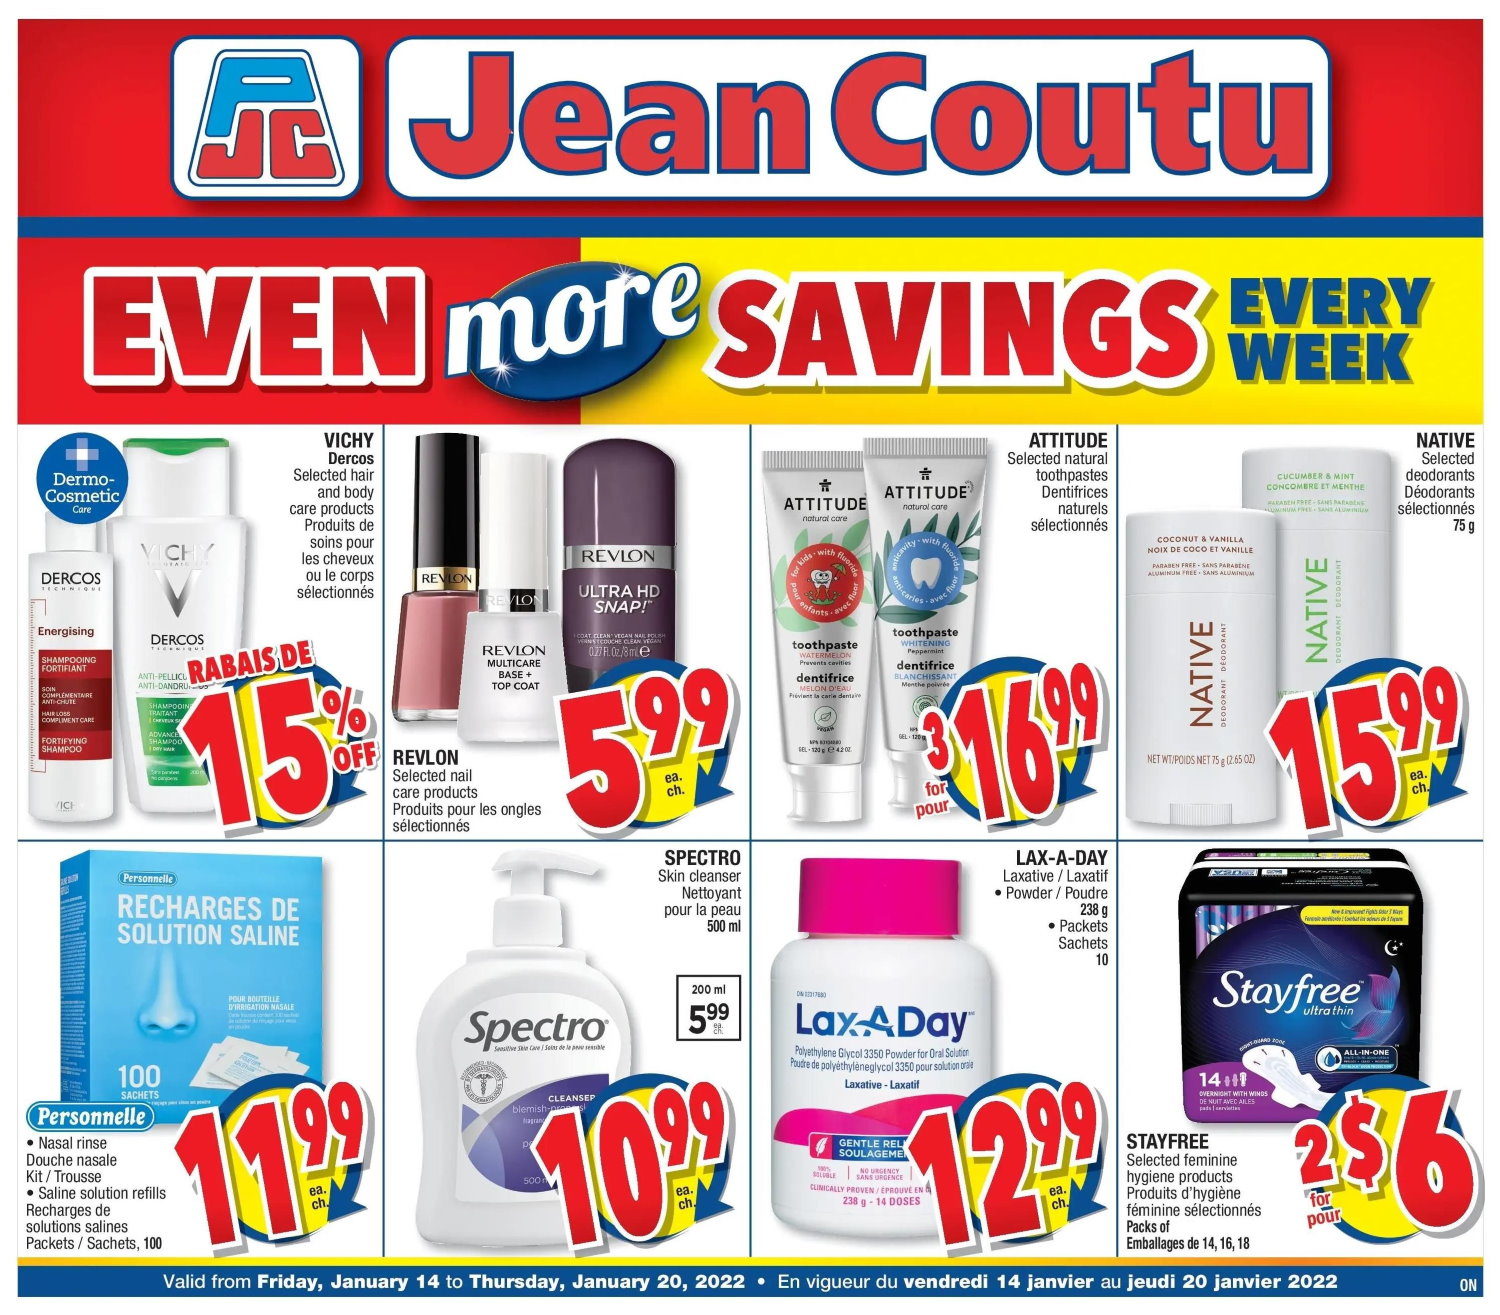 Jean Coutu - Even More Savings - Weekly Flyer Specials